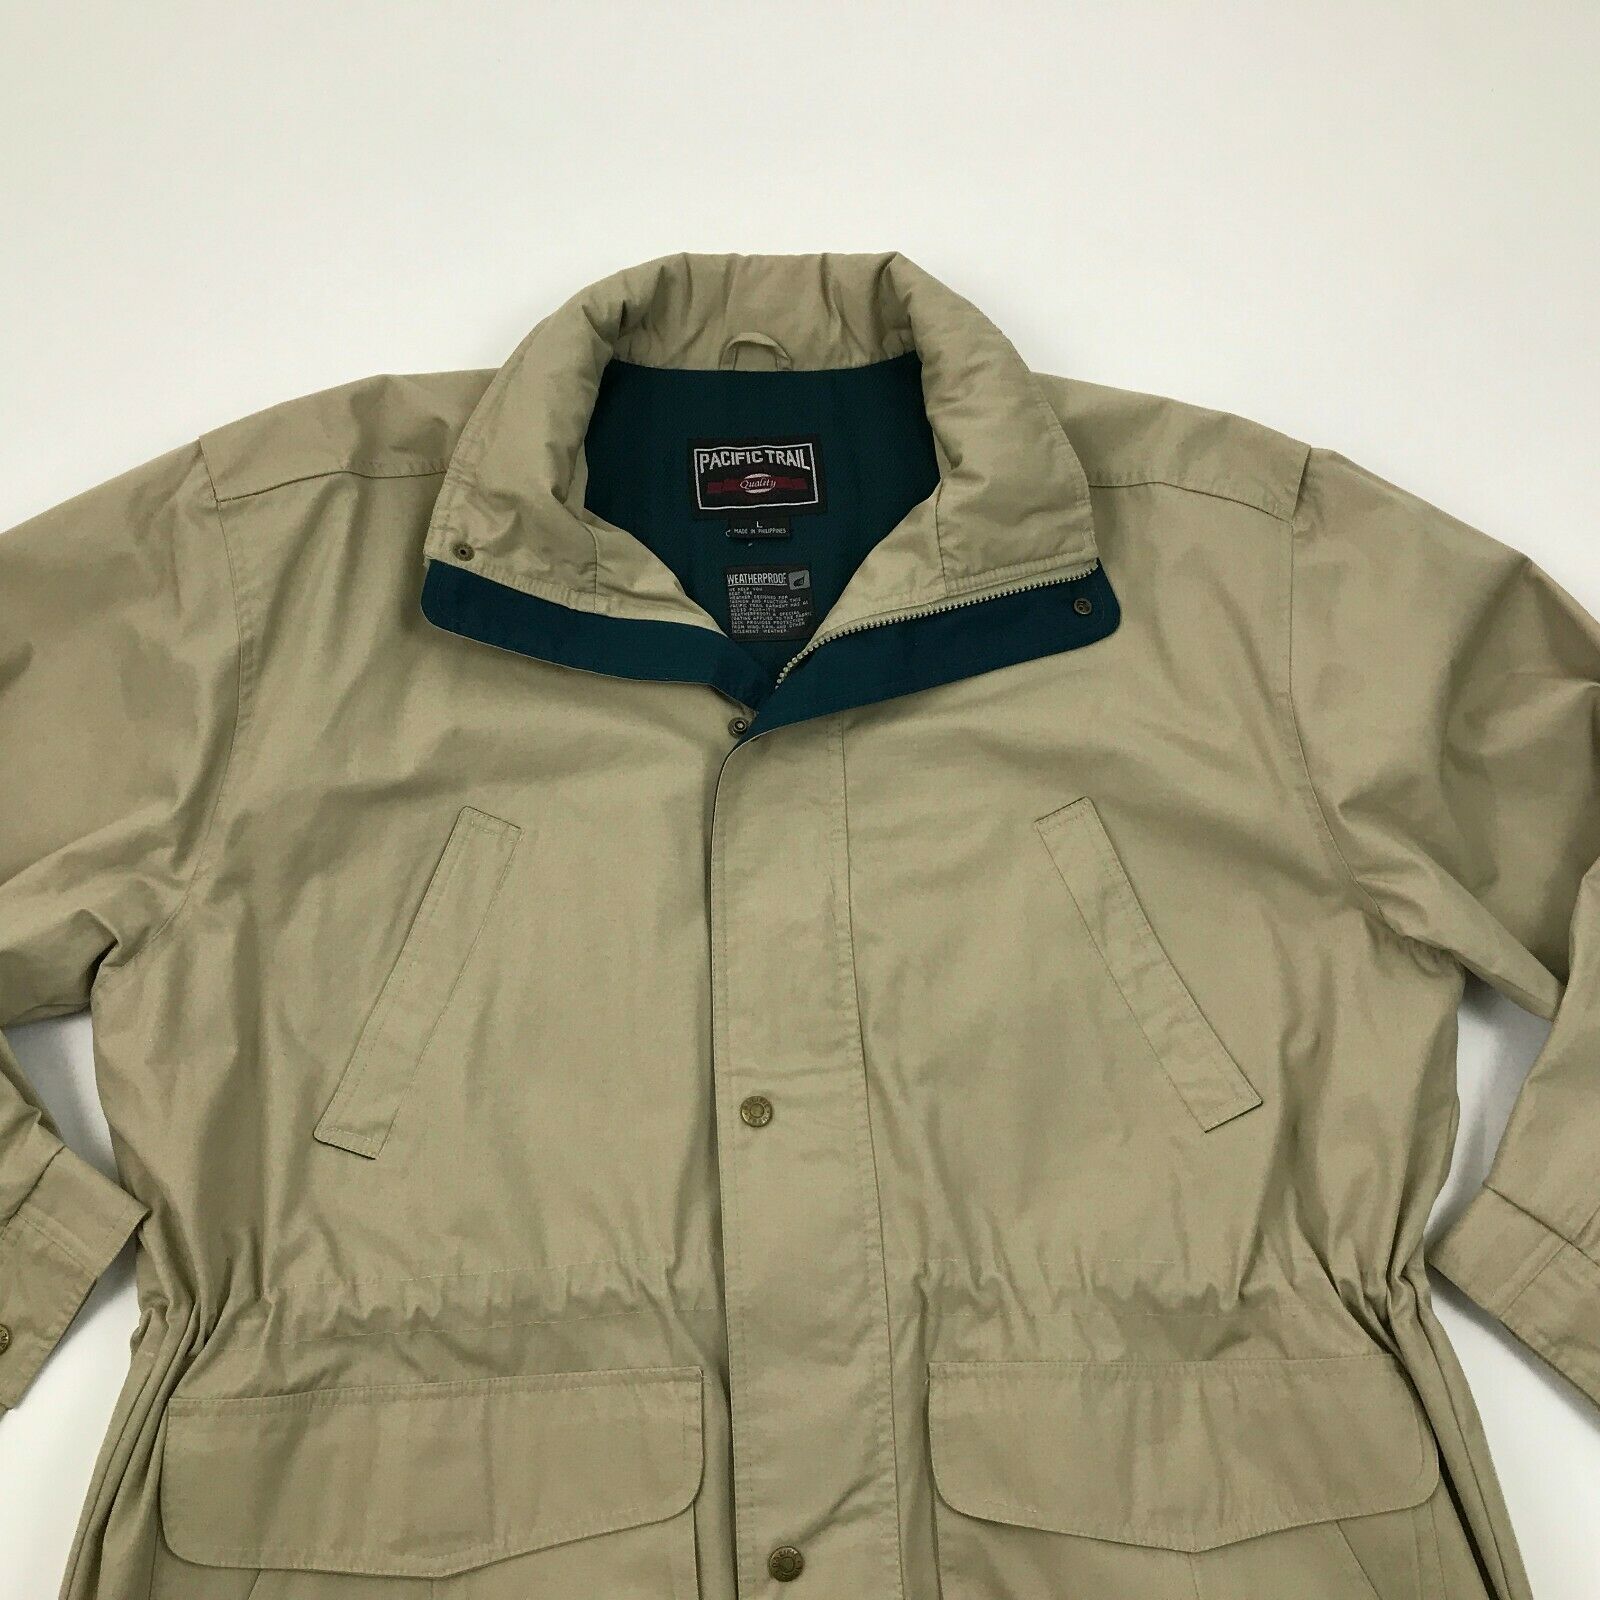 Pacific Trail WEATHERPROOF Jacket Size L Large WATERPROOF BREATHABLE ...